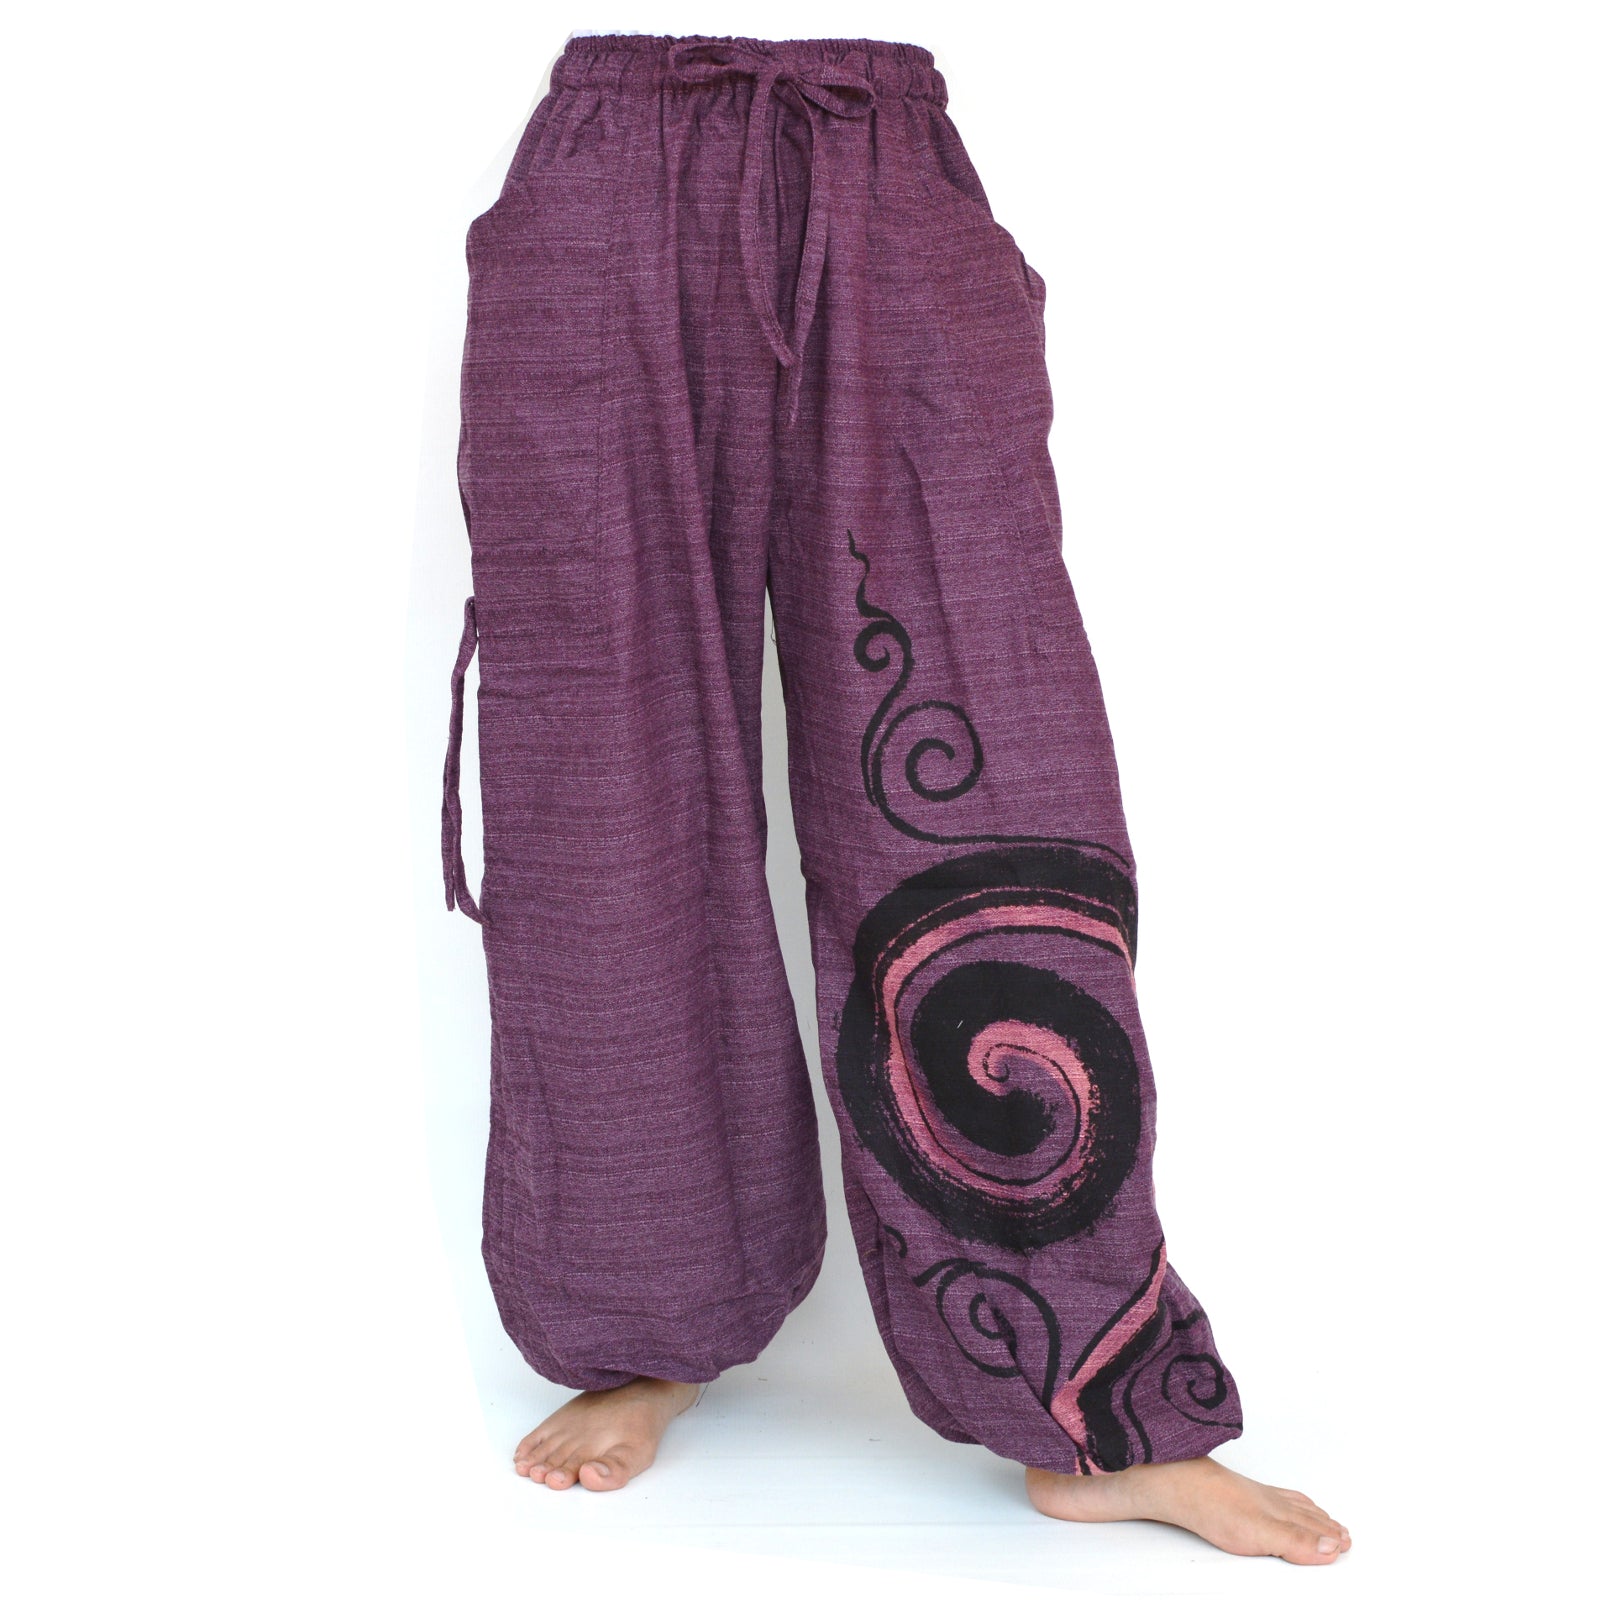 Siamrose Harem Pants and Unique Clothing for Women and Men